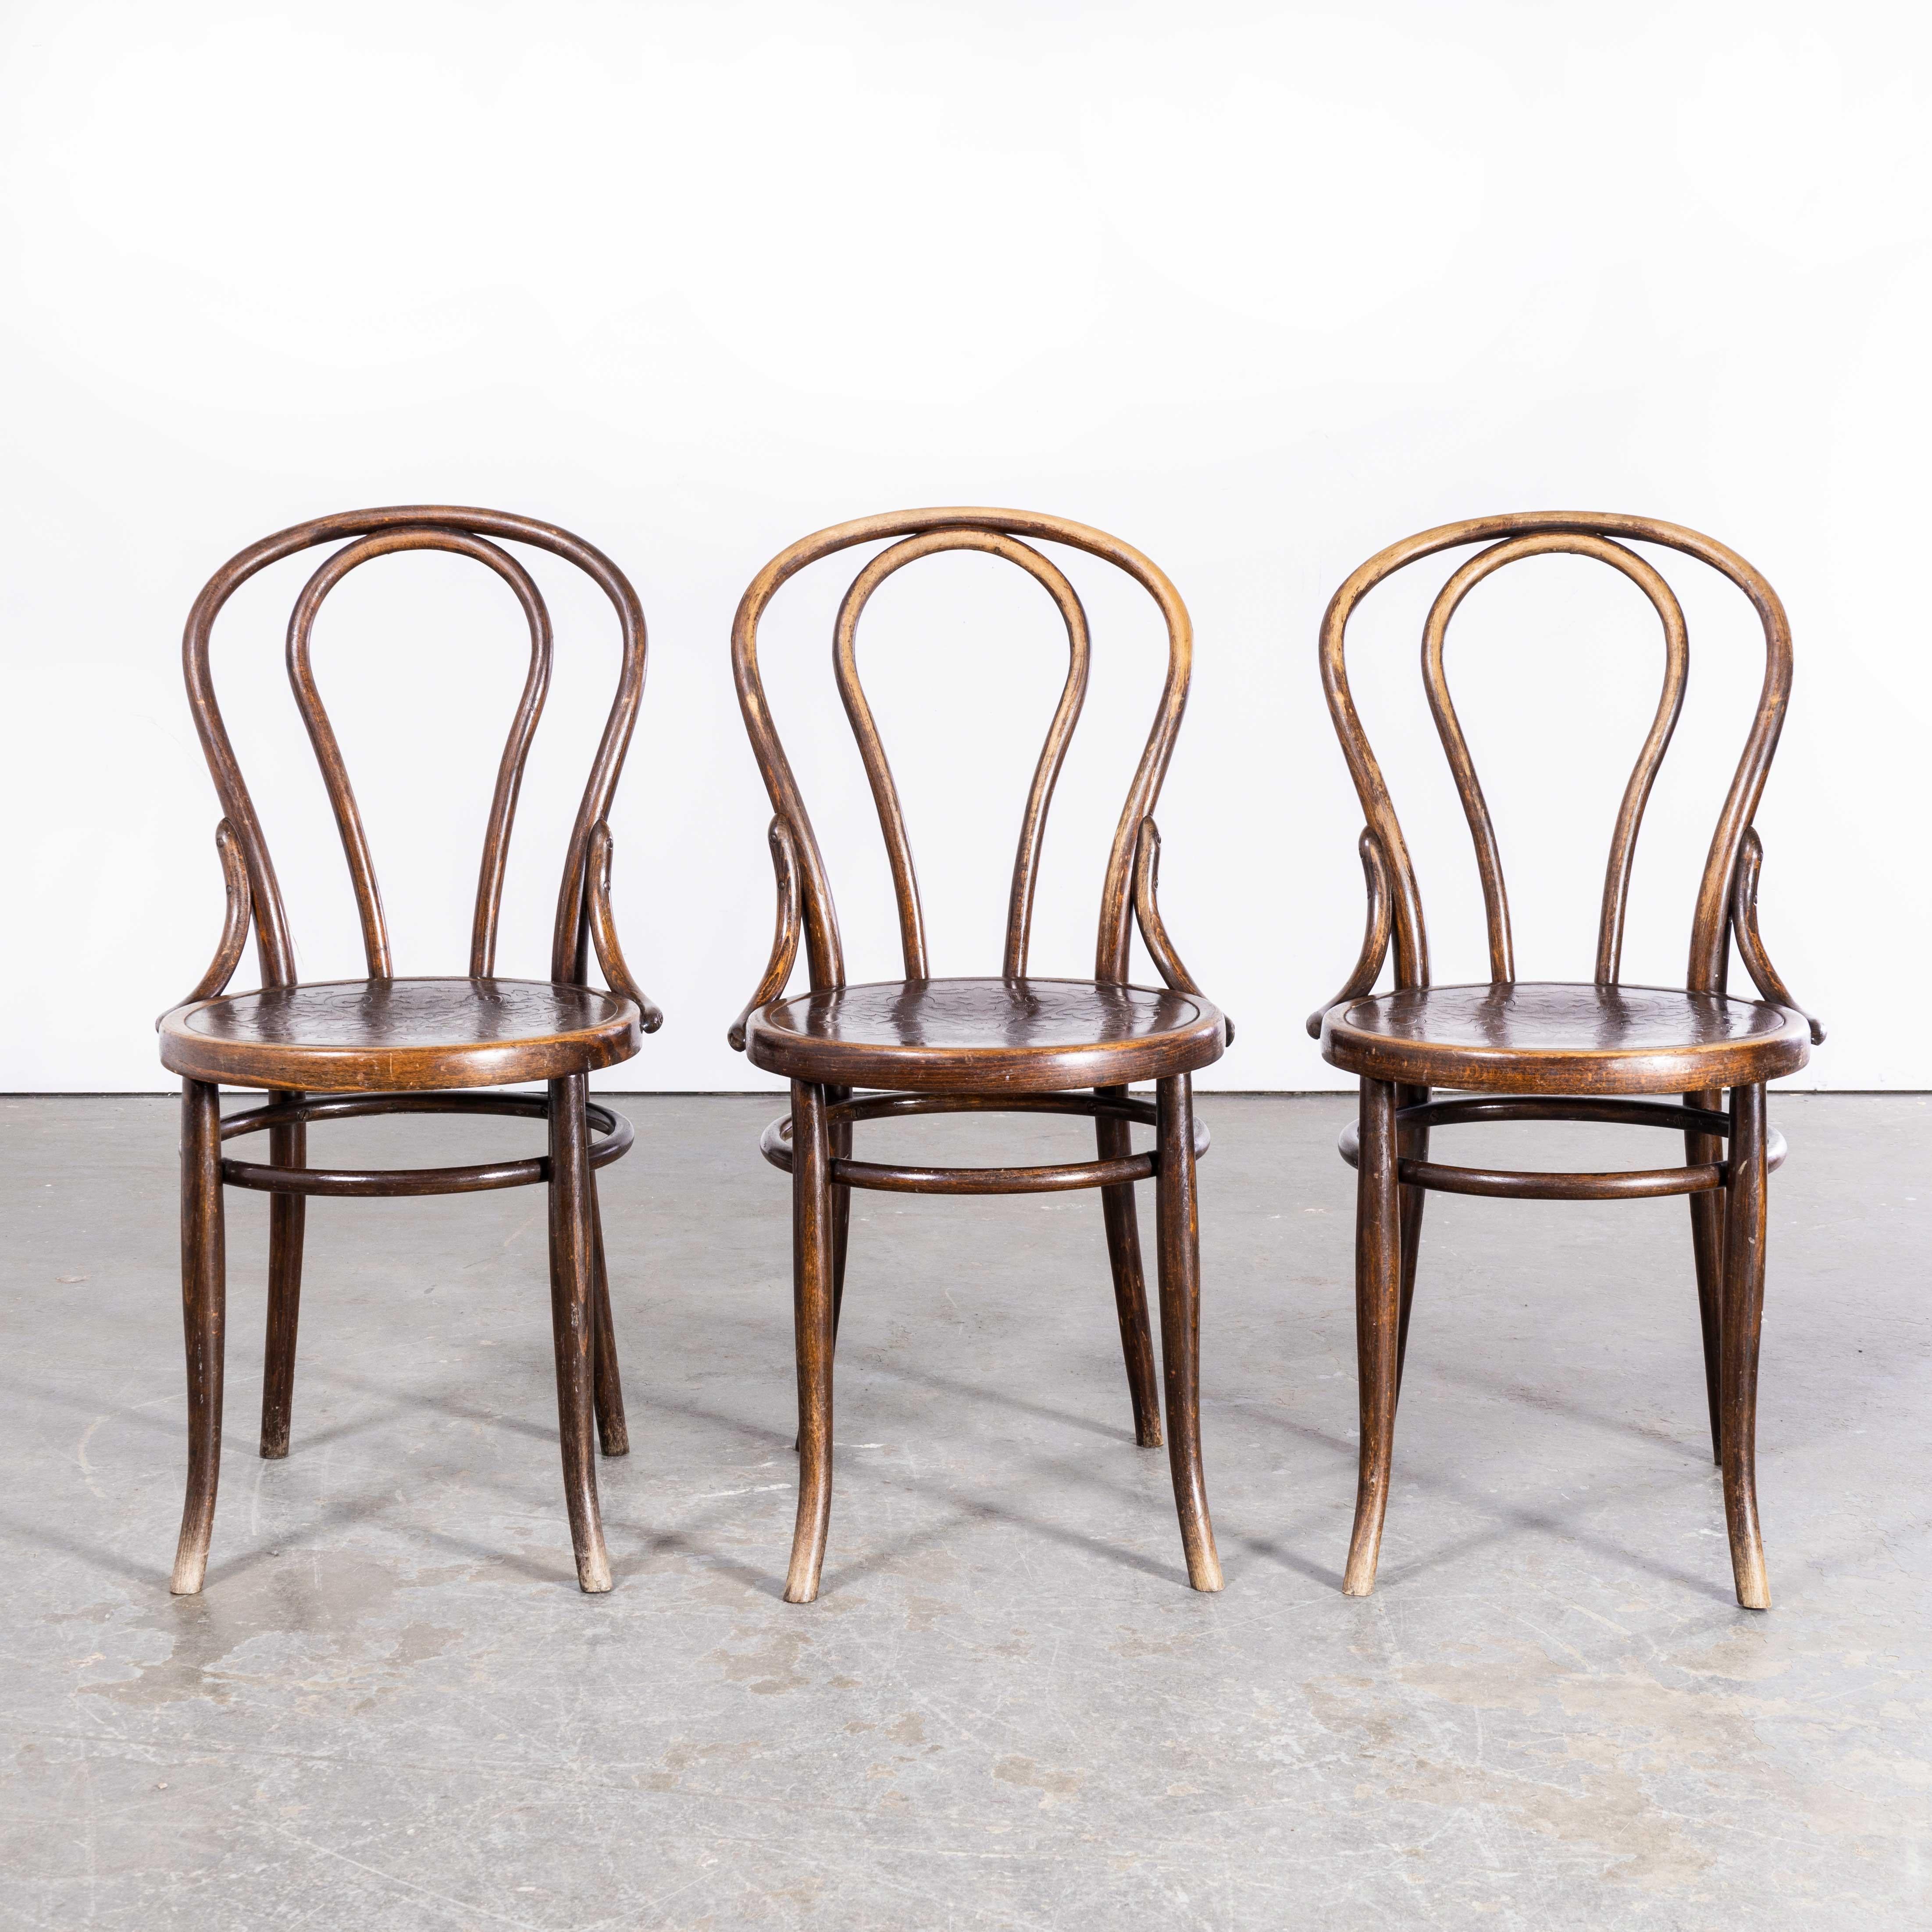 European 1920s Bentwood Ungvar Ungarn Hoop Dining Chairs, Set of Three